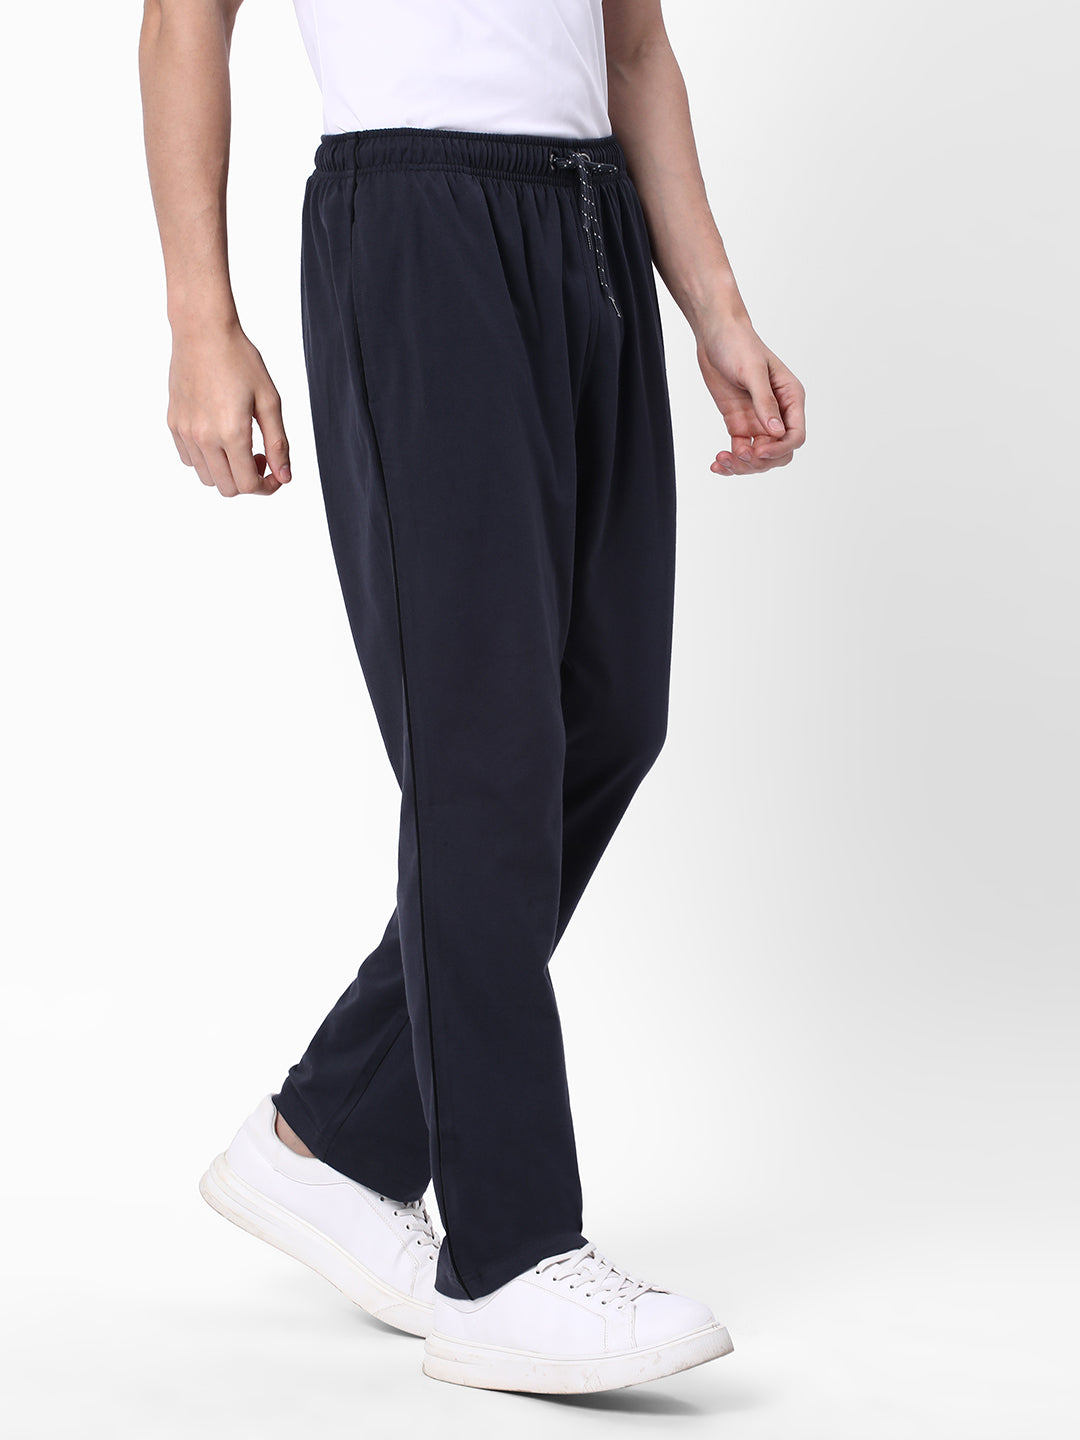 Cotstyle Men's Super Combed Cotton Regular-Fit Track Pants with Side Pocket, Colour Dark Grey-Style no.TP1101